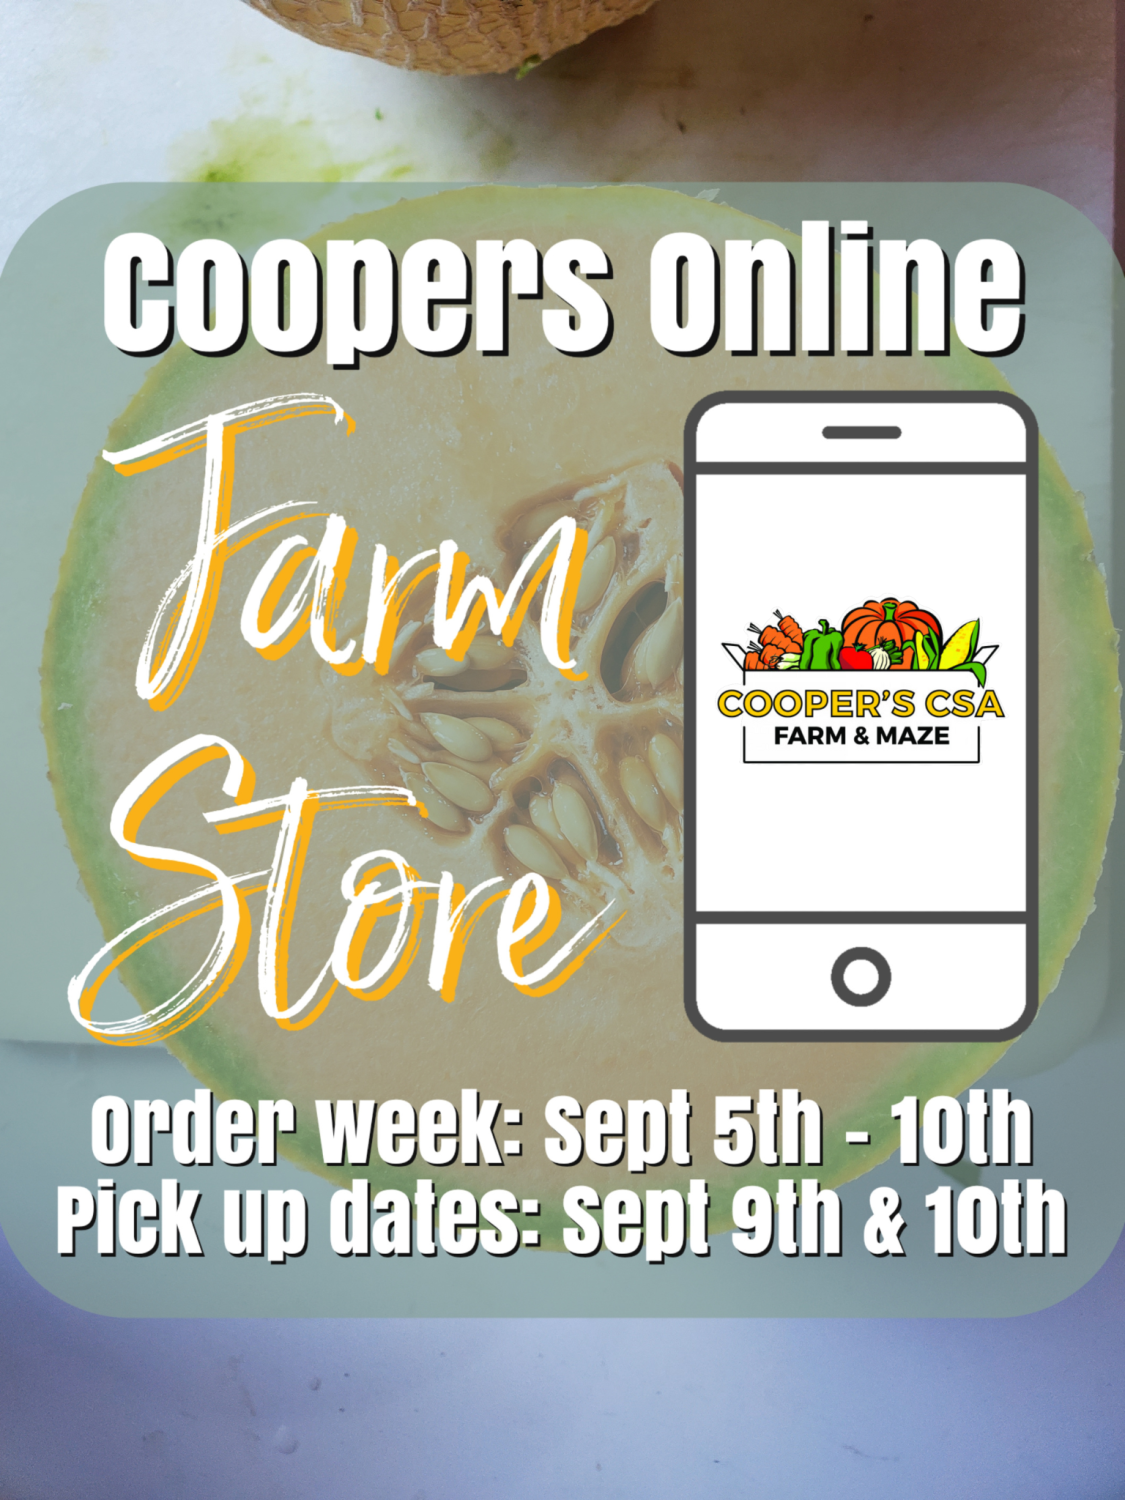 Previous Happening: Coopers Online Farm Stand- September 5th-10th